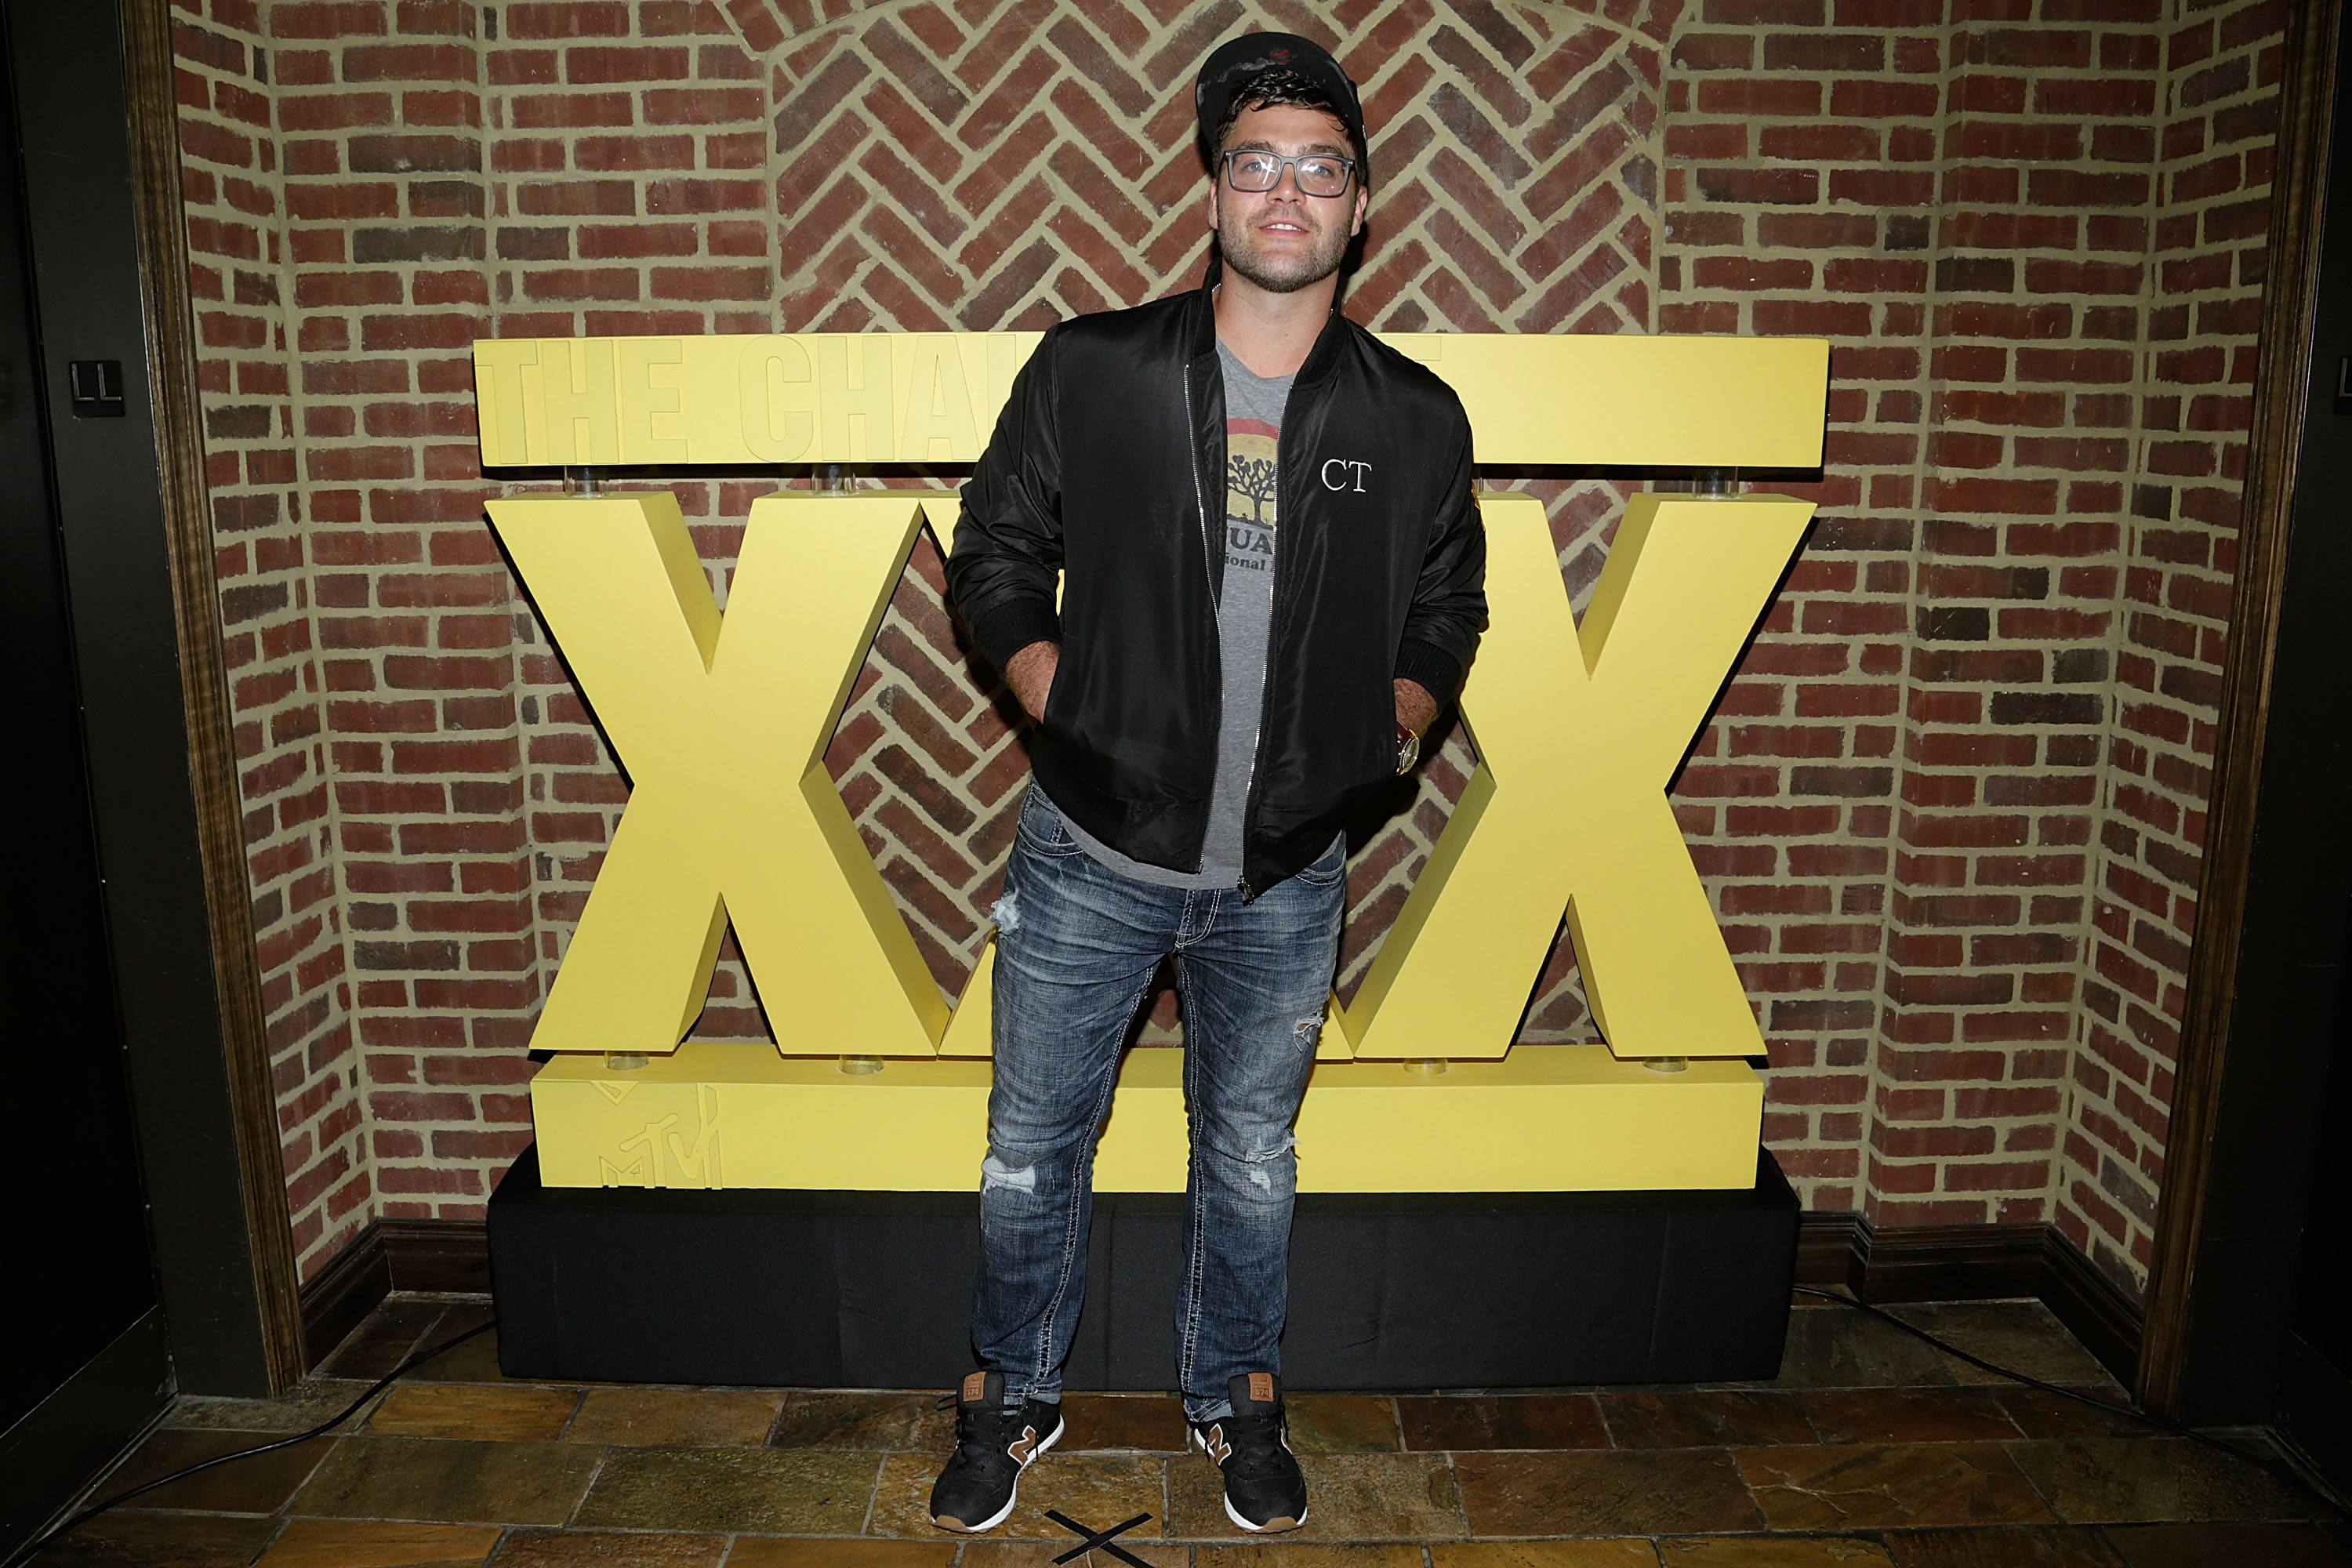 Chris "CT" Tamburello attends The Challenge XXX: Ultimate Fan Experience Q & A and Reception